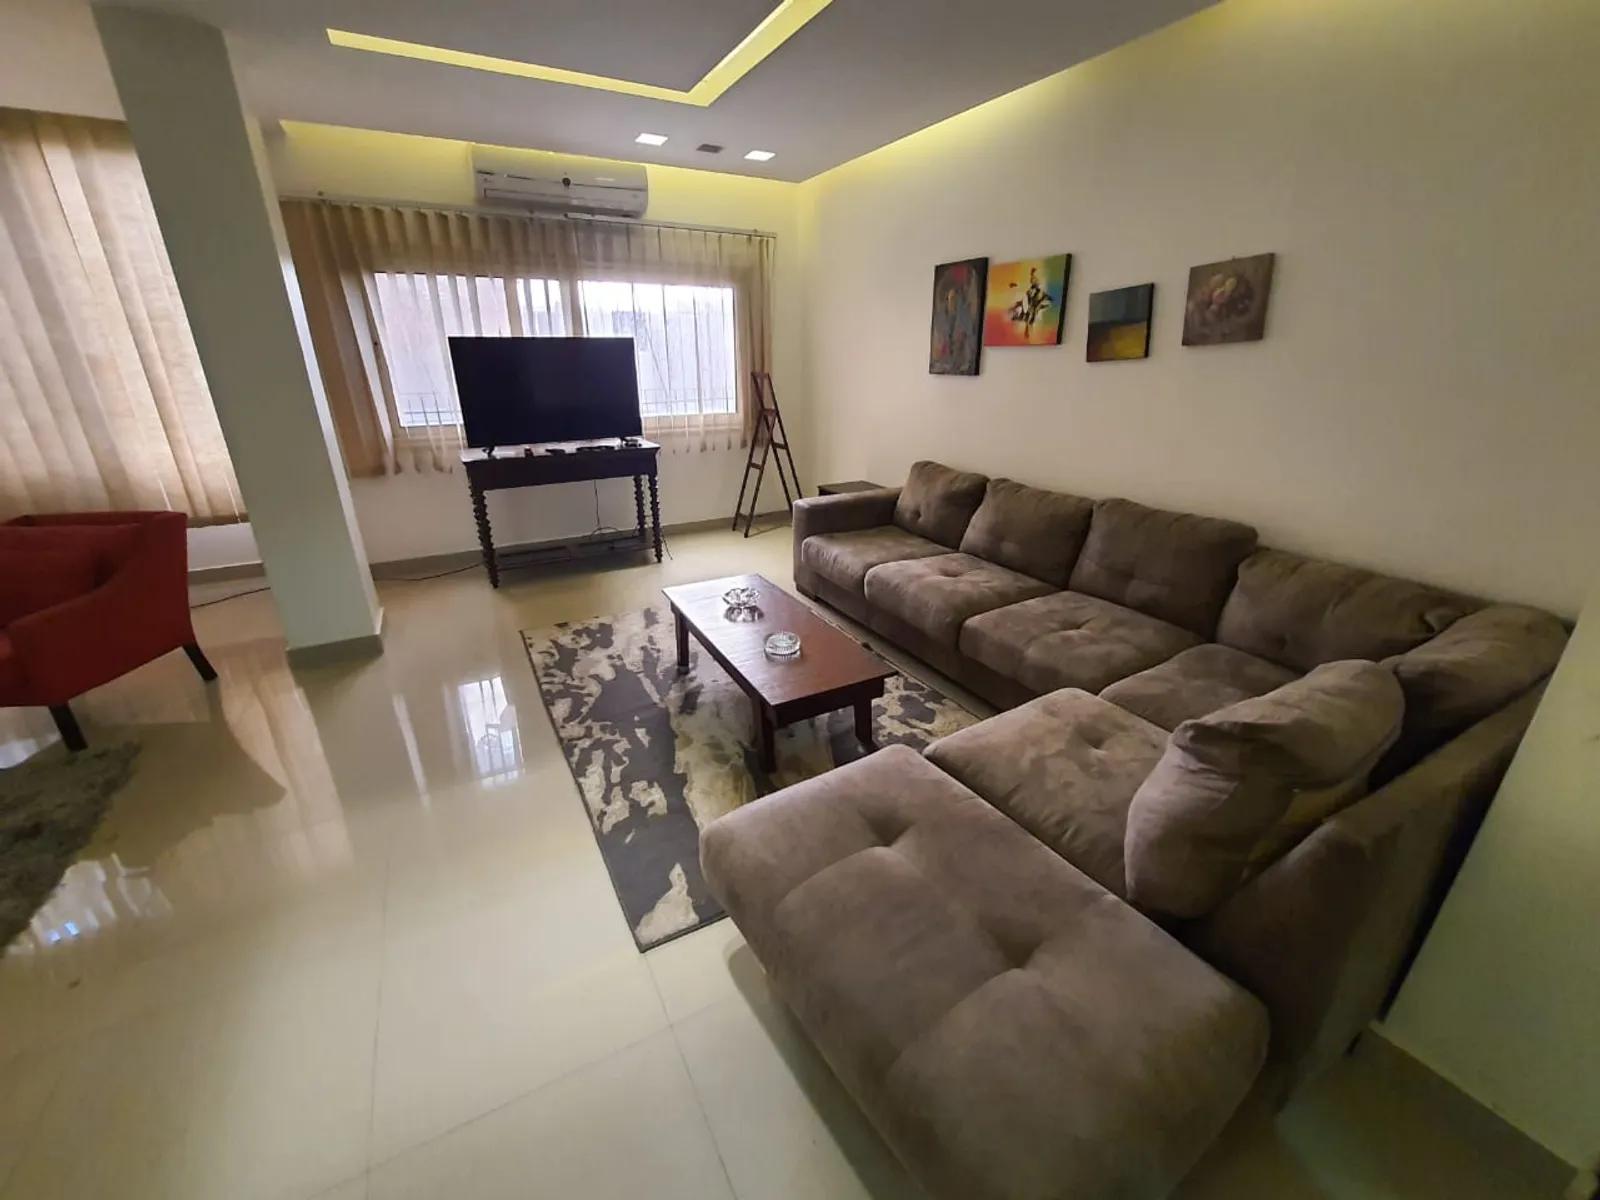 RECEPTION  @ Apartments For Rent In Maadi Maadi Sarayat Area: 220 m² consists of 3 Bedrooms 2 Bathrooms Modern furnished 5 stars #3432-1